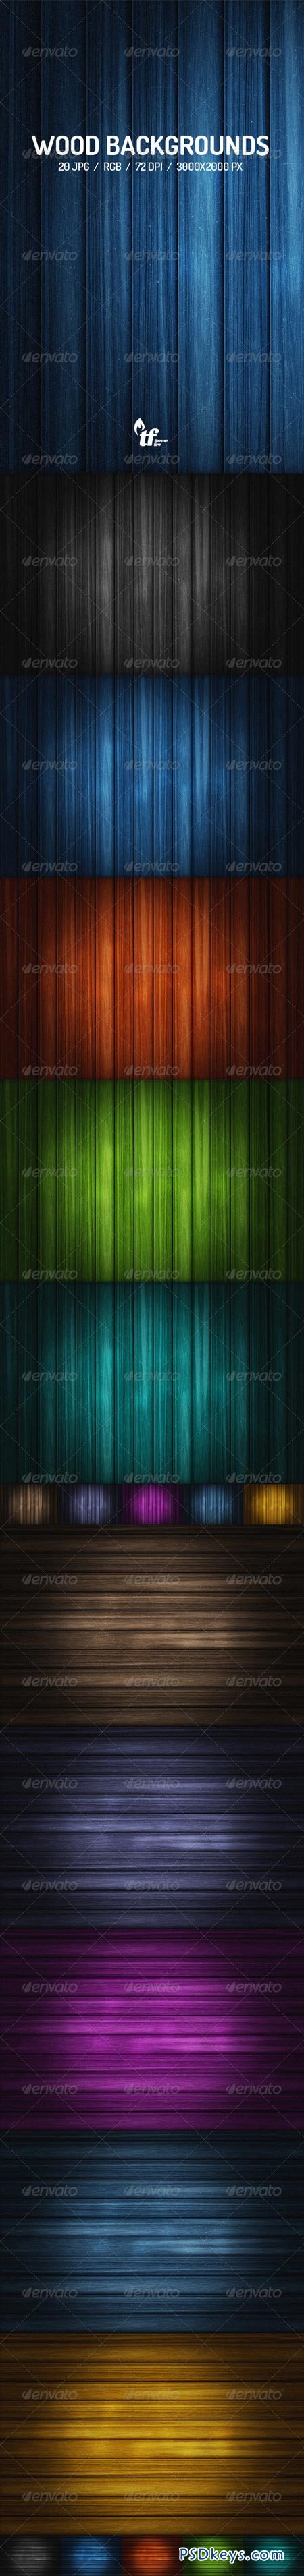 20 Wood Backgrounds 7790683